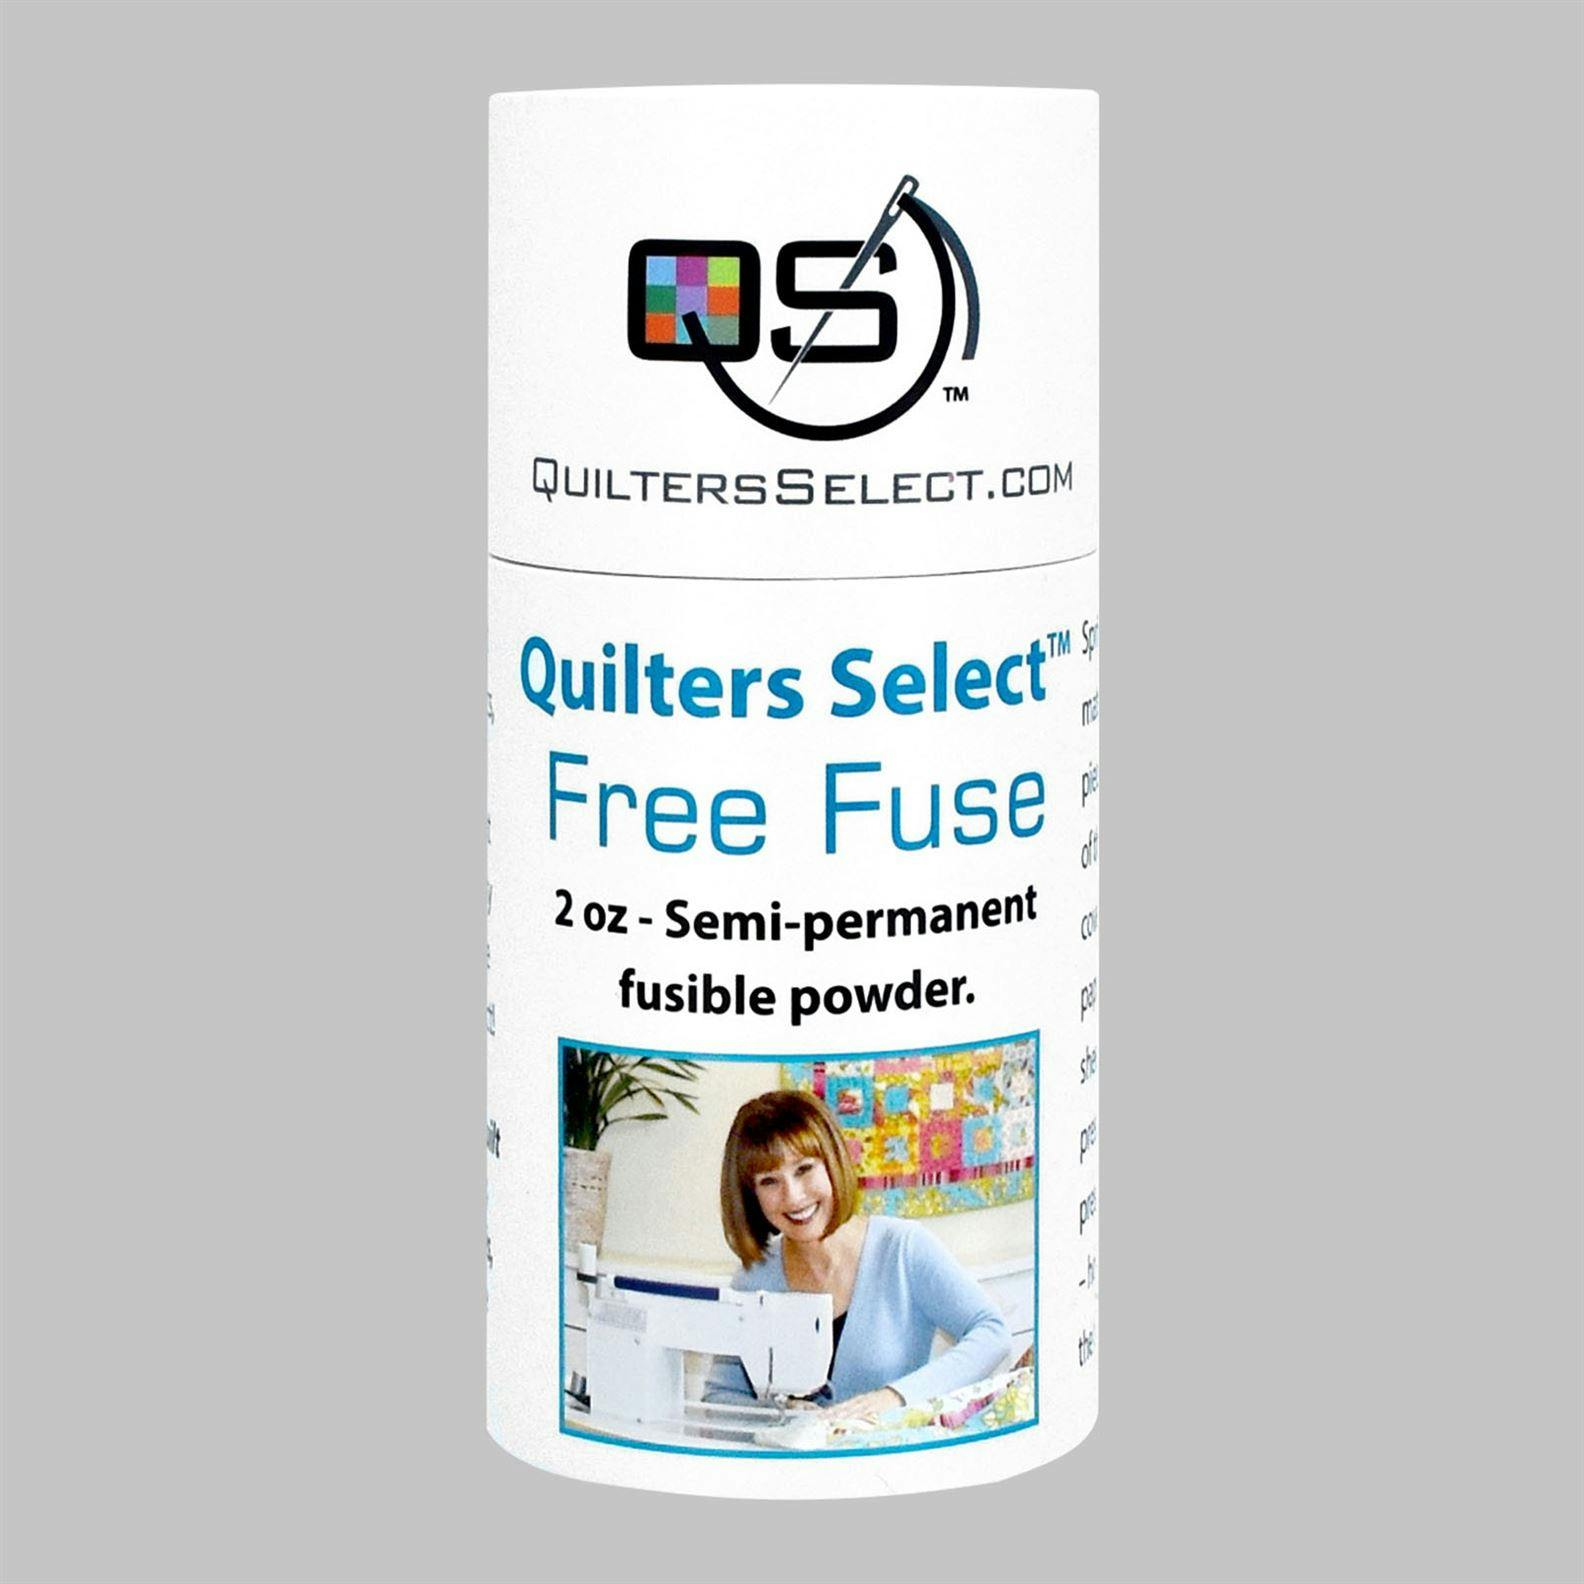 Shaker bottle of Quilter's Select Free Fuse